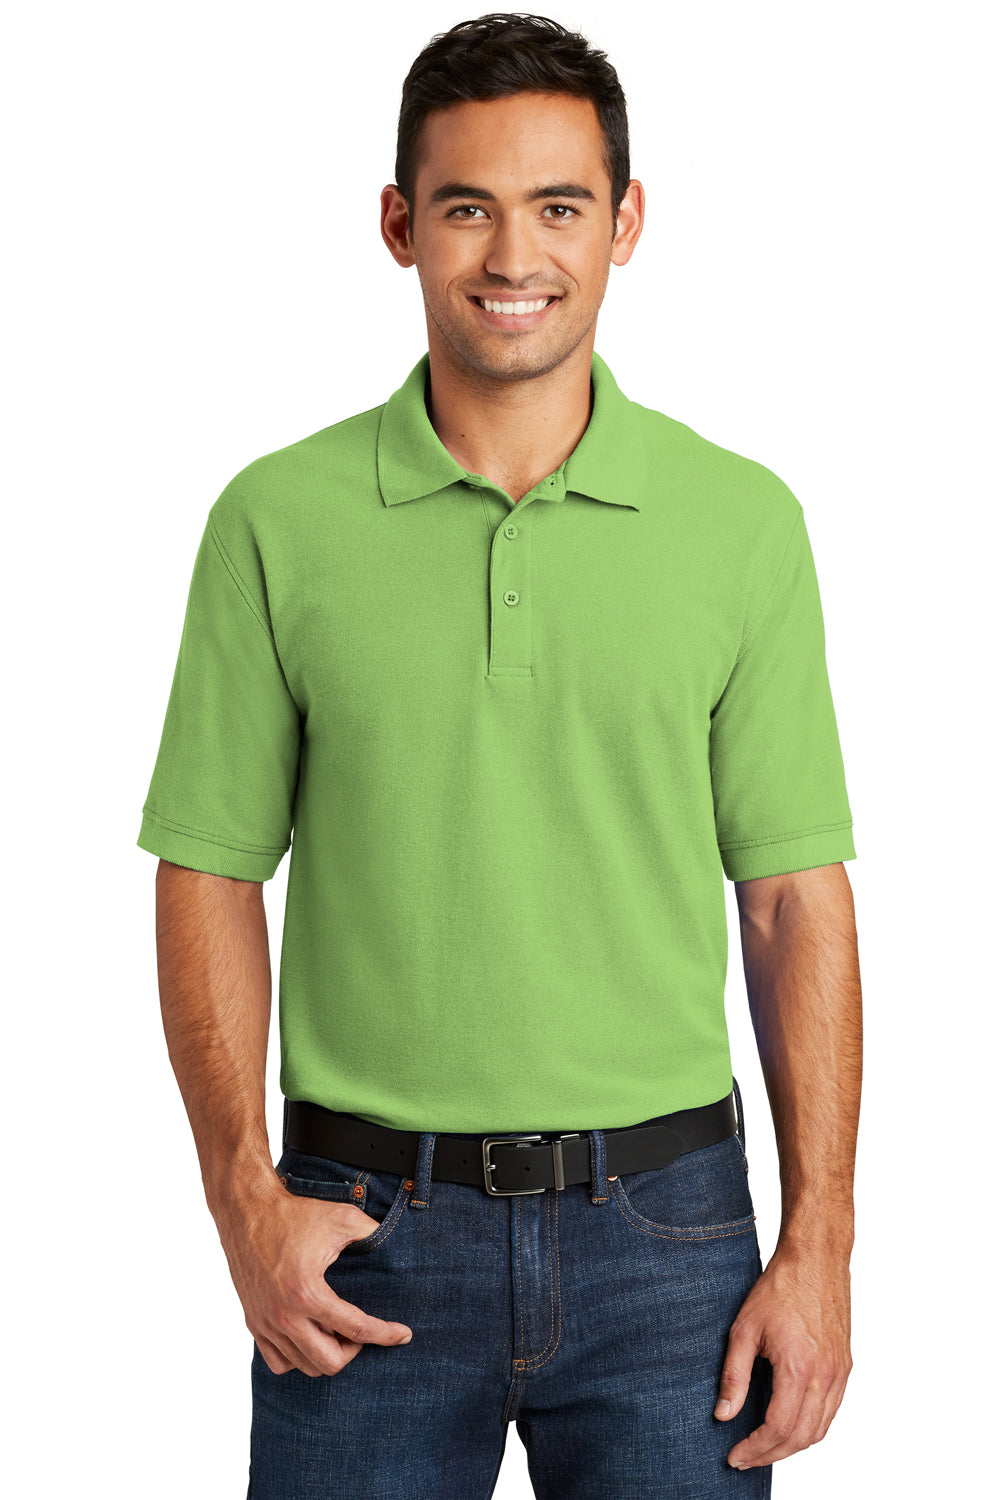 Port & Company KP155 Mens Core Stain Resistant Short Sleeve Polo Shirt Lime Green Front